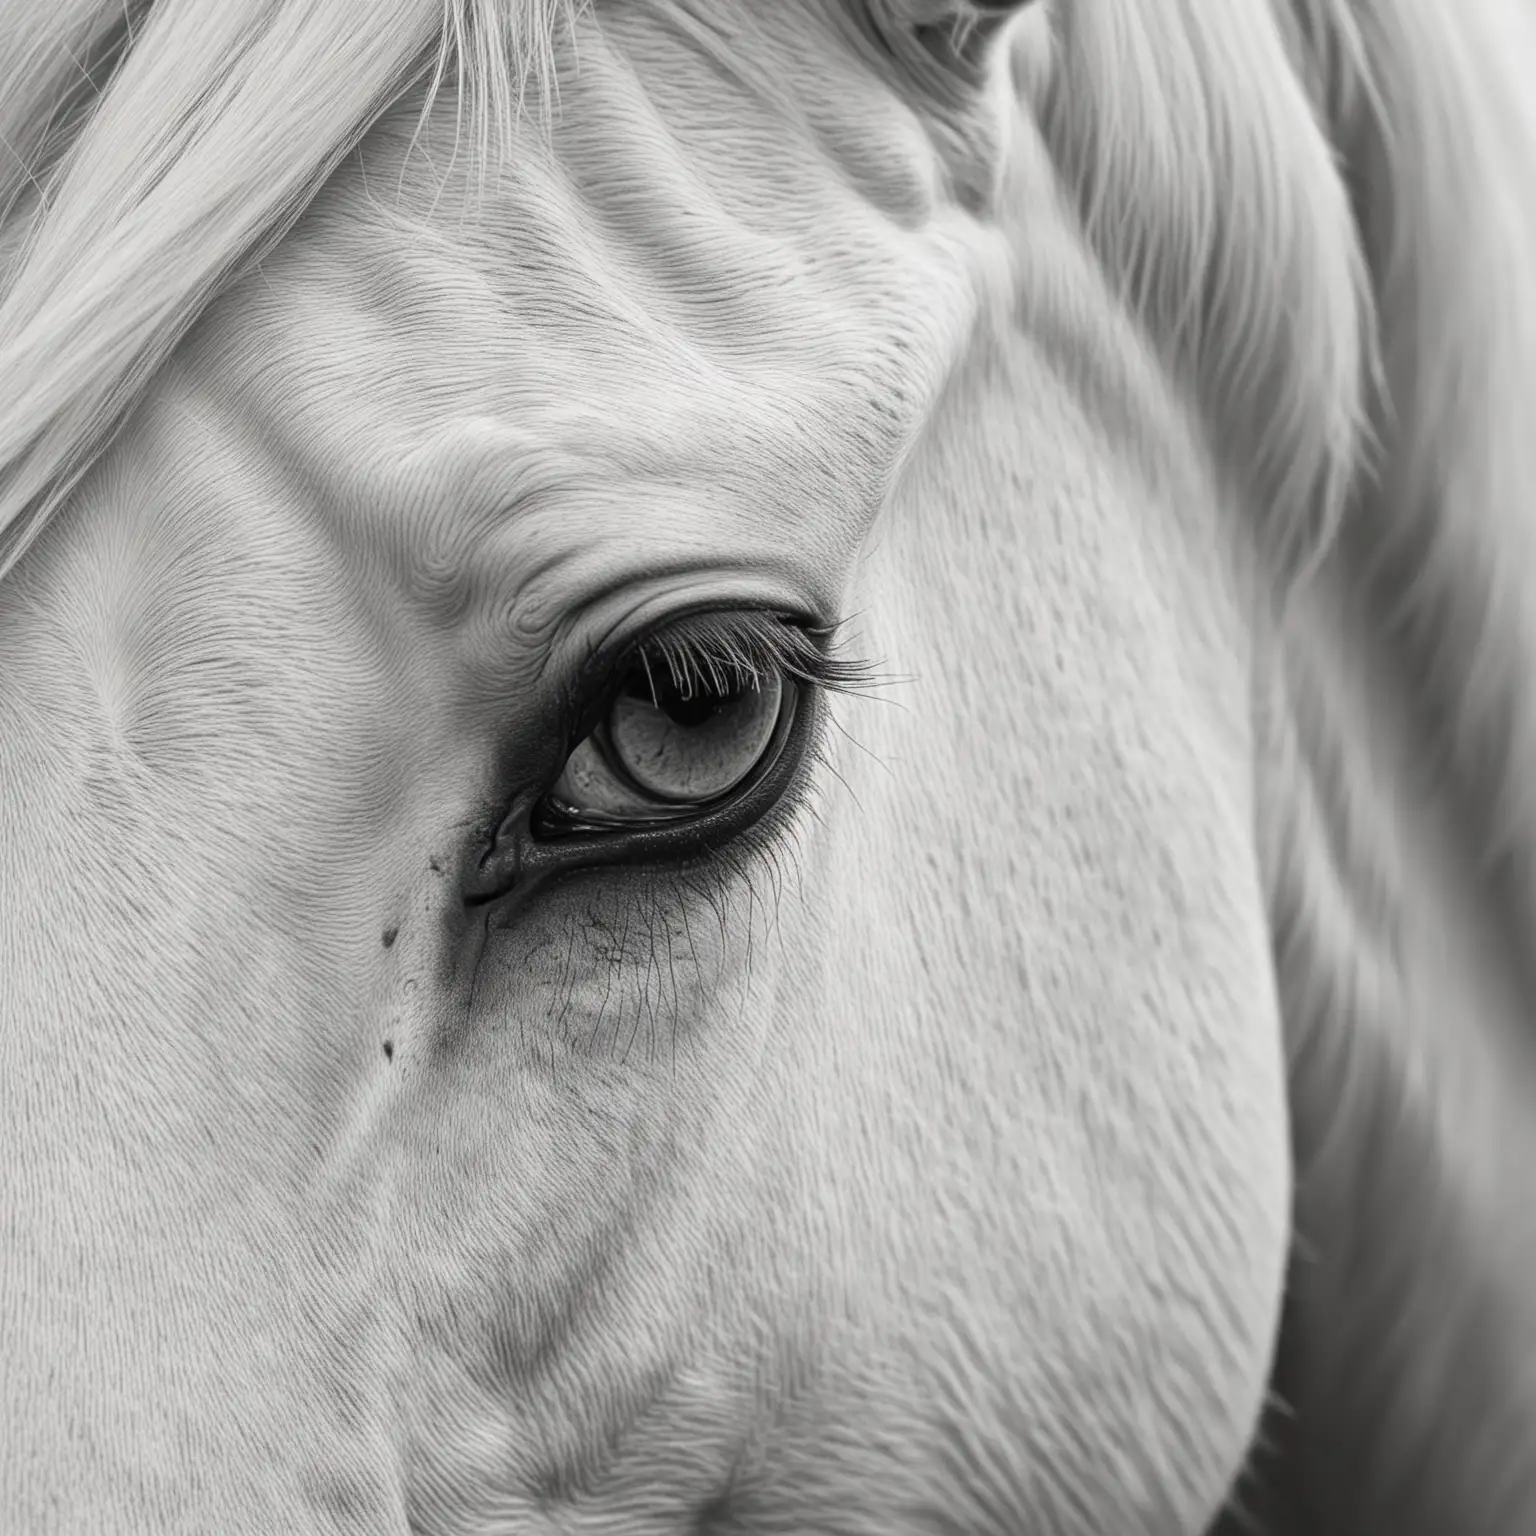 Stunning CloseUp Portrait of a White Horse Artistic Black and White Photography by Macek